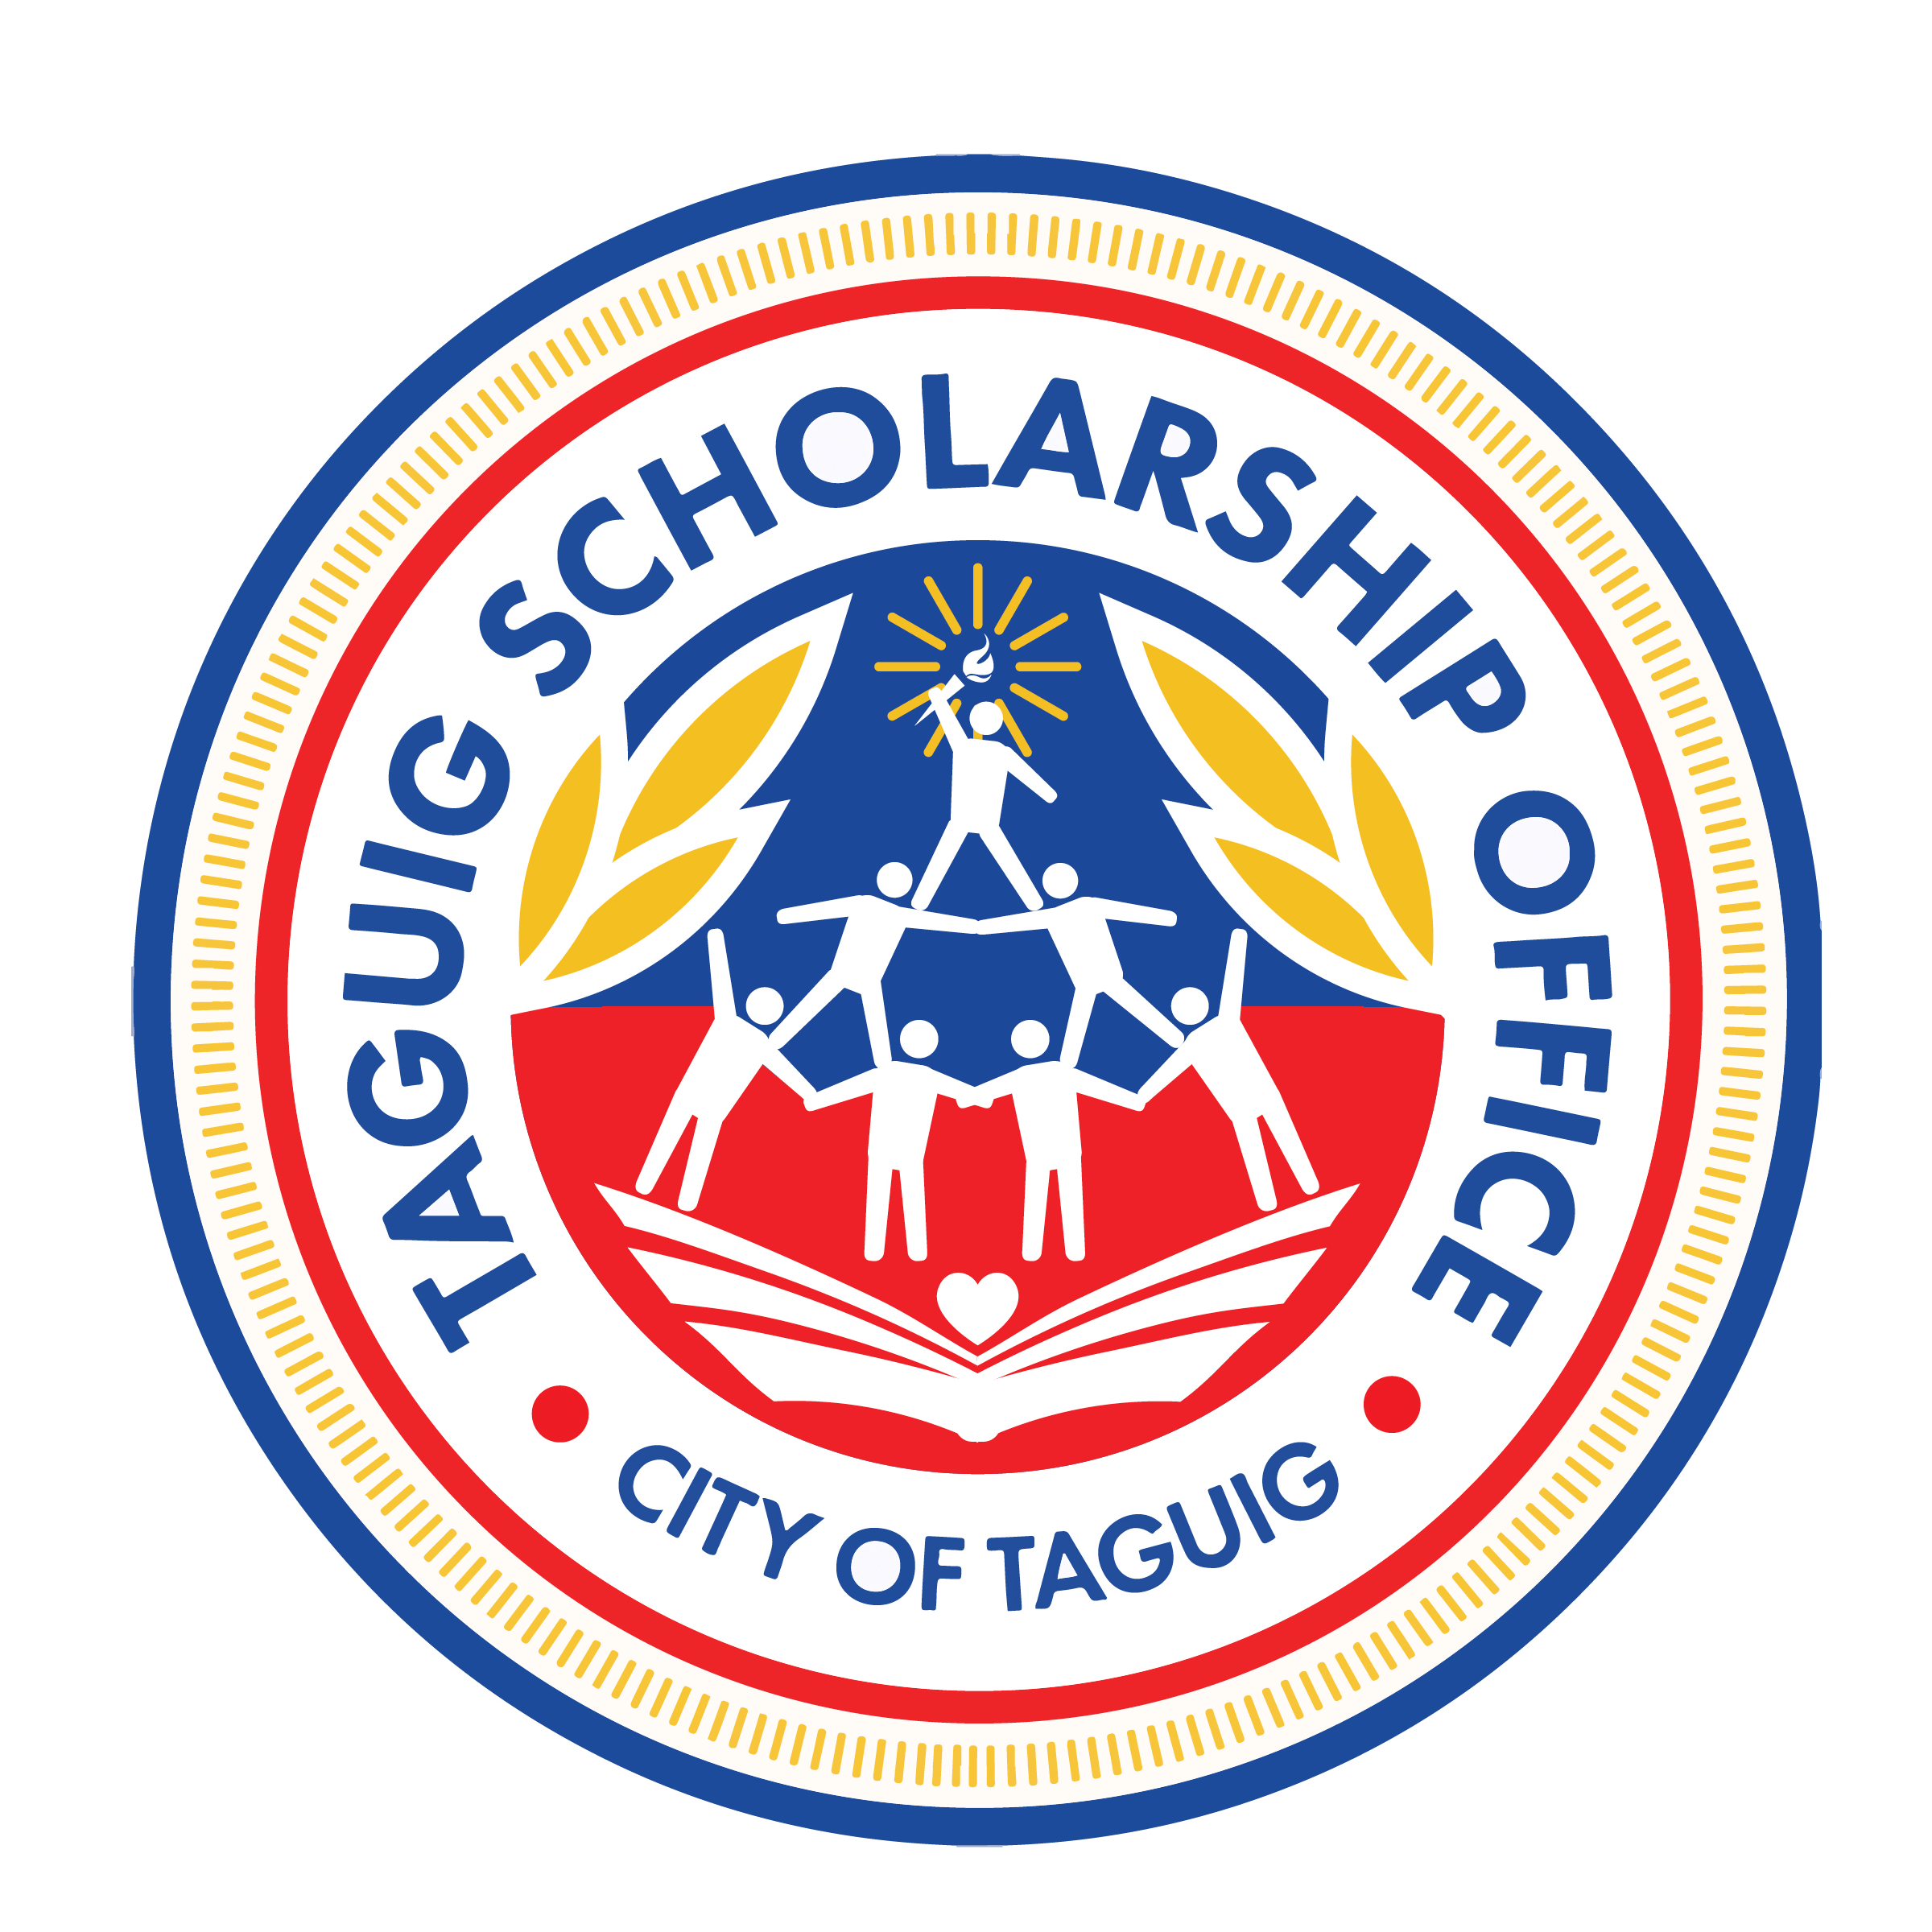 City of Taguig Seal